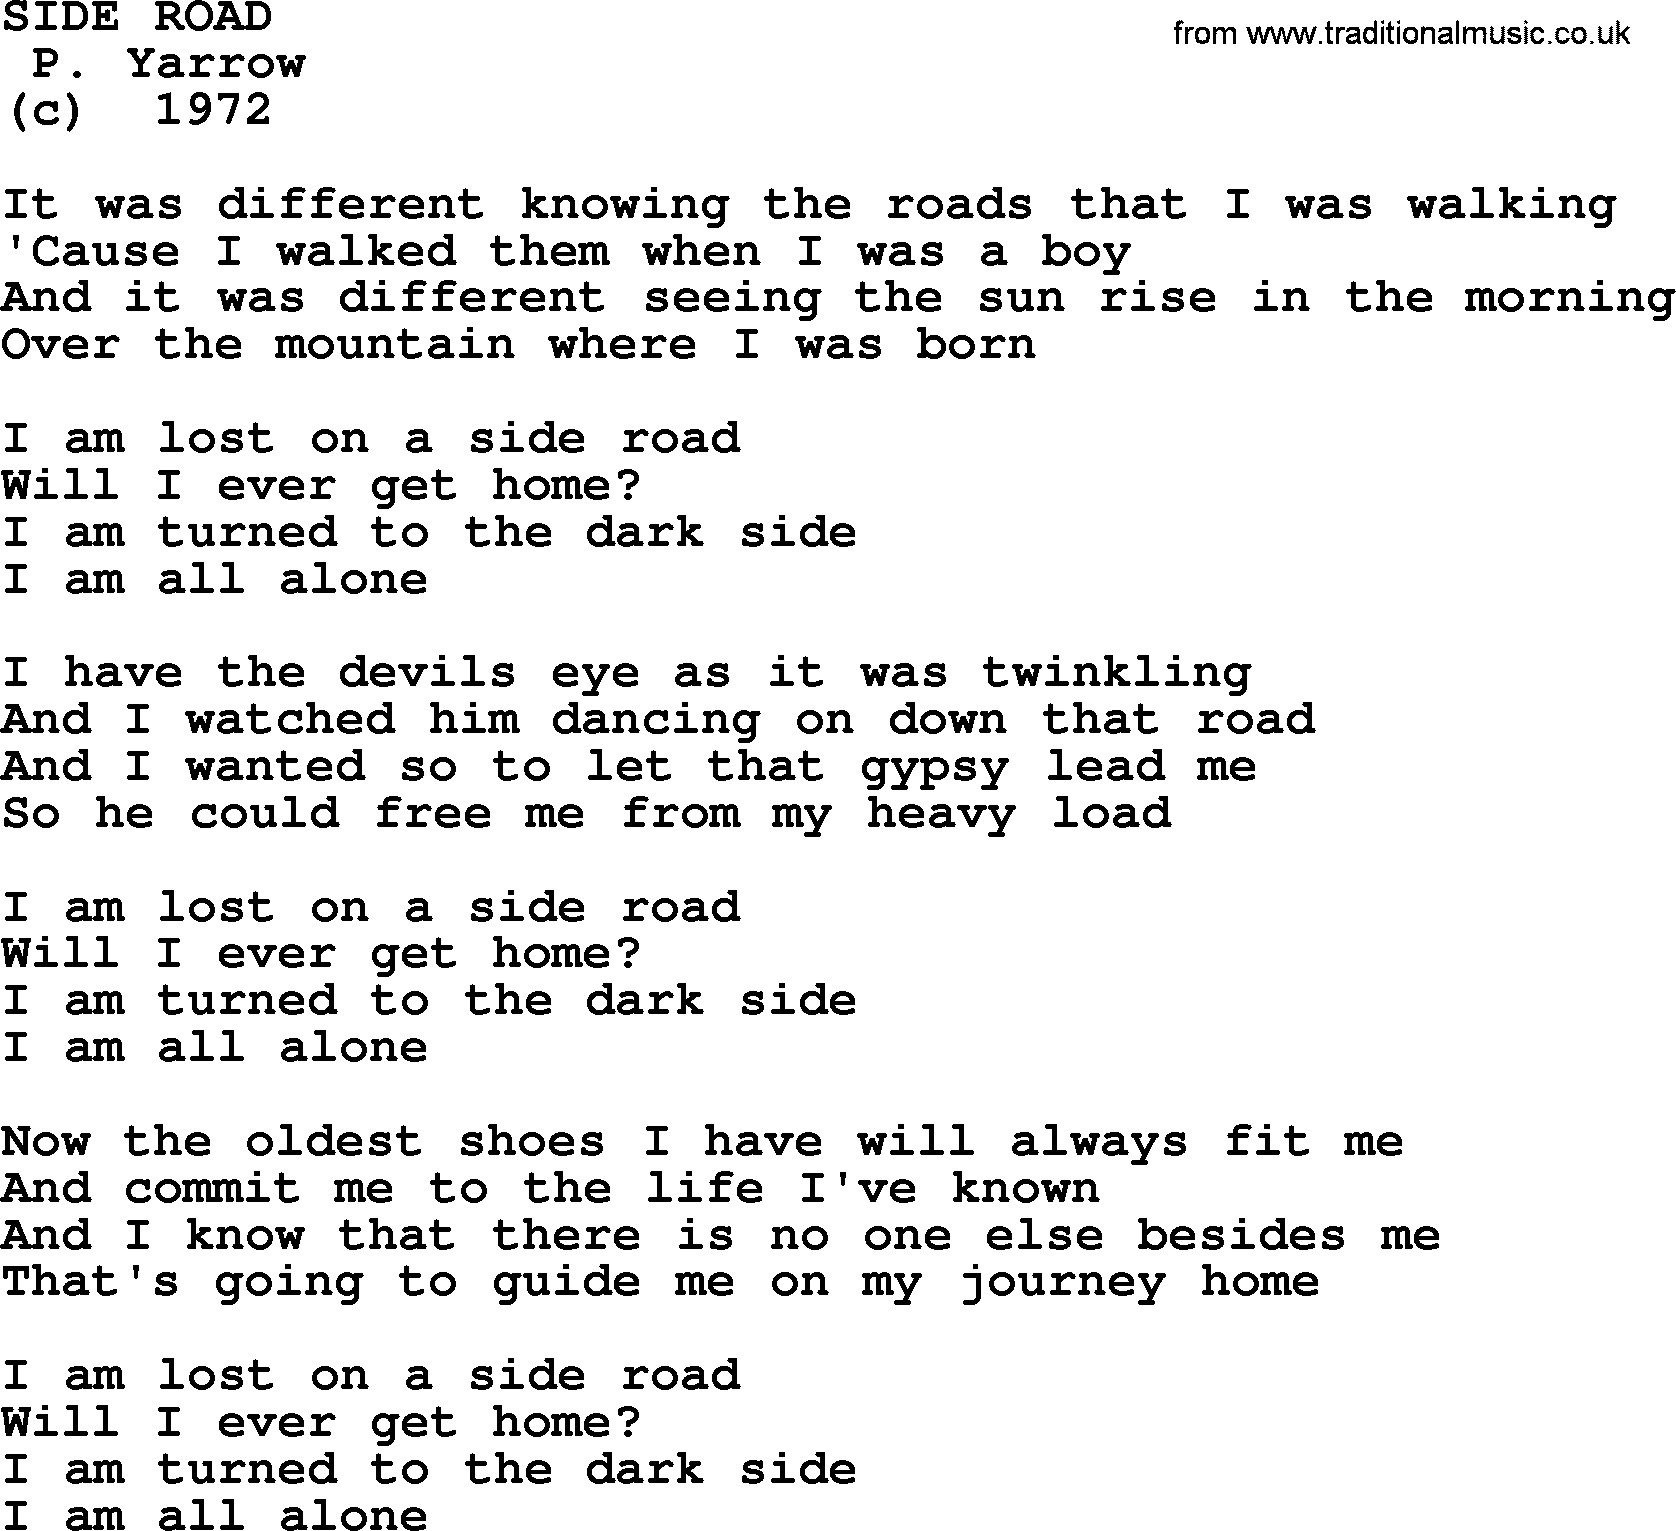 Peter, Paul and Mary song Side Road lyrics